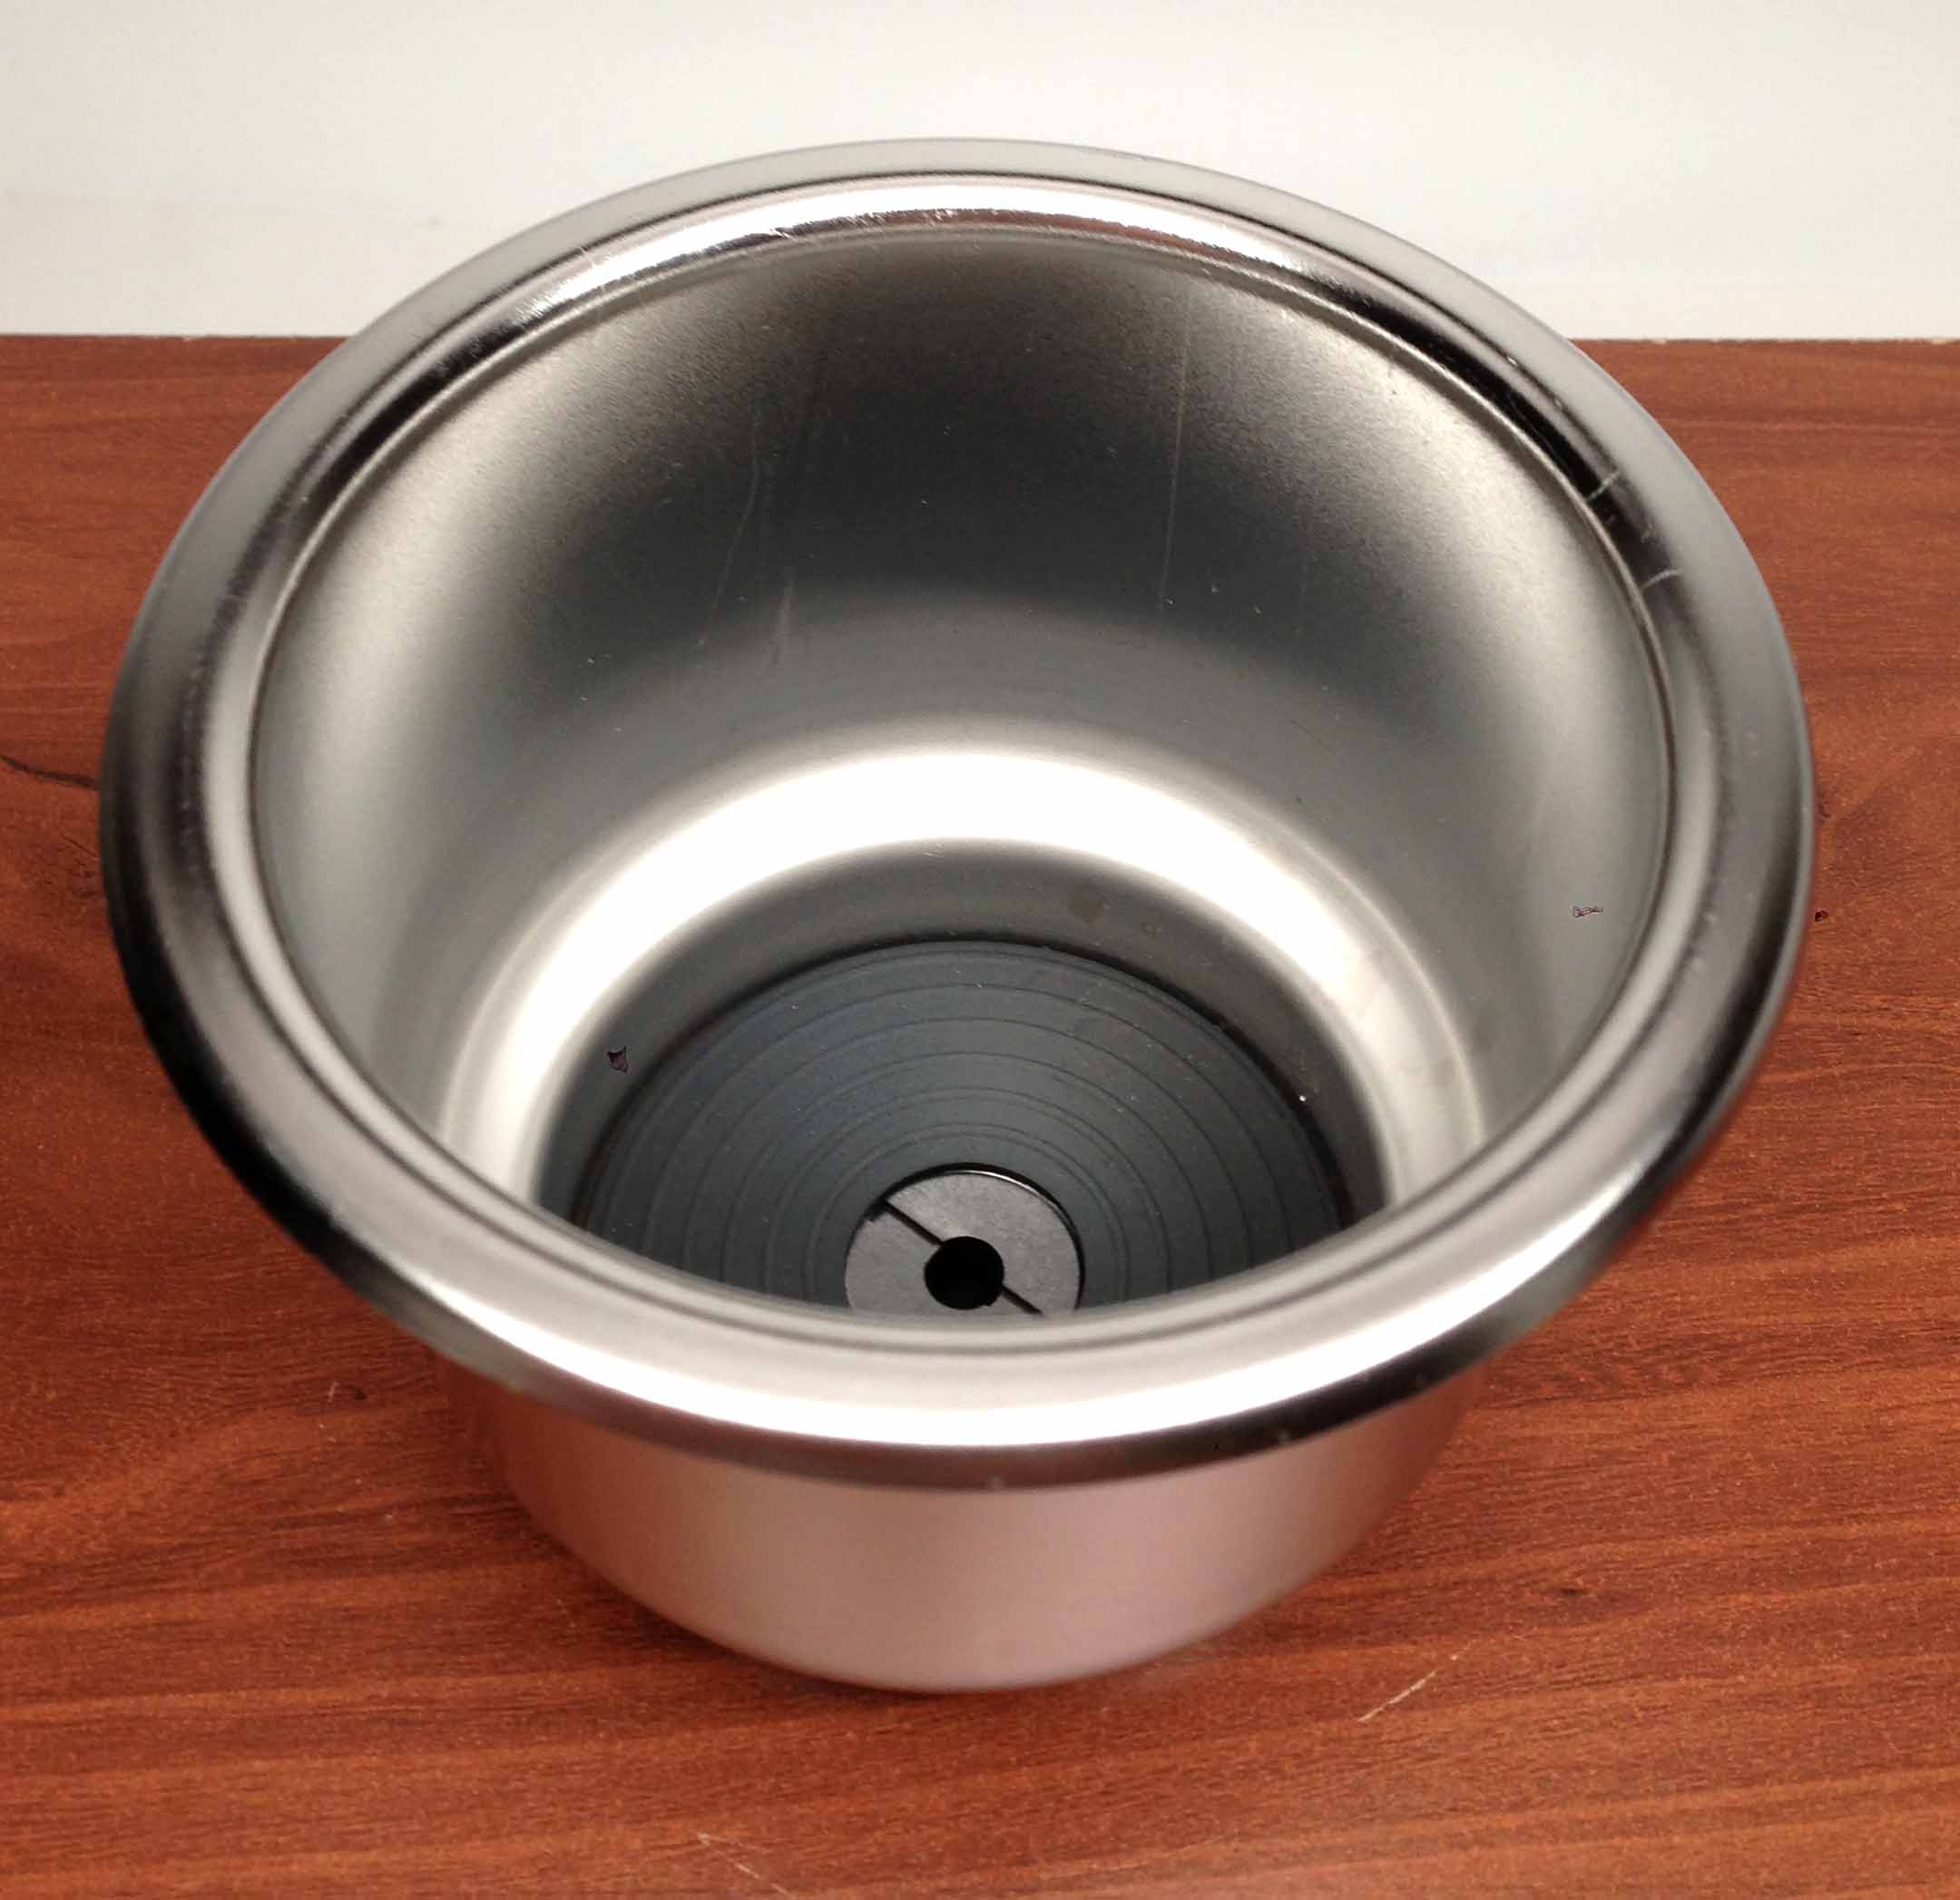 STAINLESS STEEL CUP DRINK HOLDER MARINE BOAT RV CAMPER TRUCK HIGH 3.5 Inch Stainless Steel Cup Holder